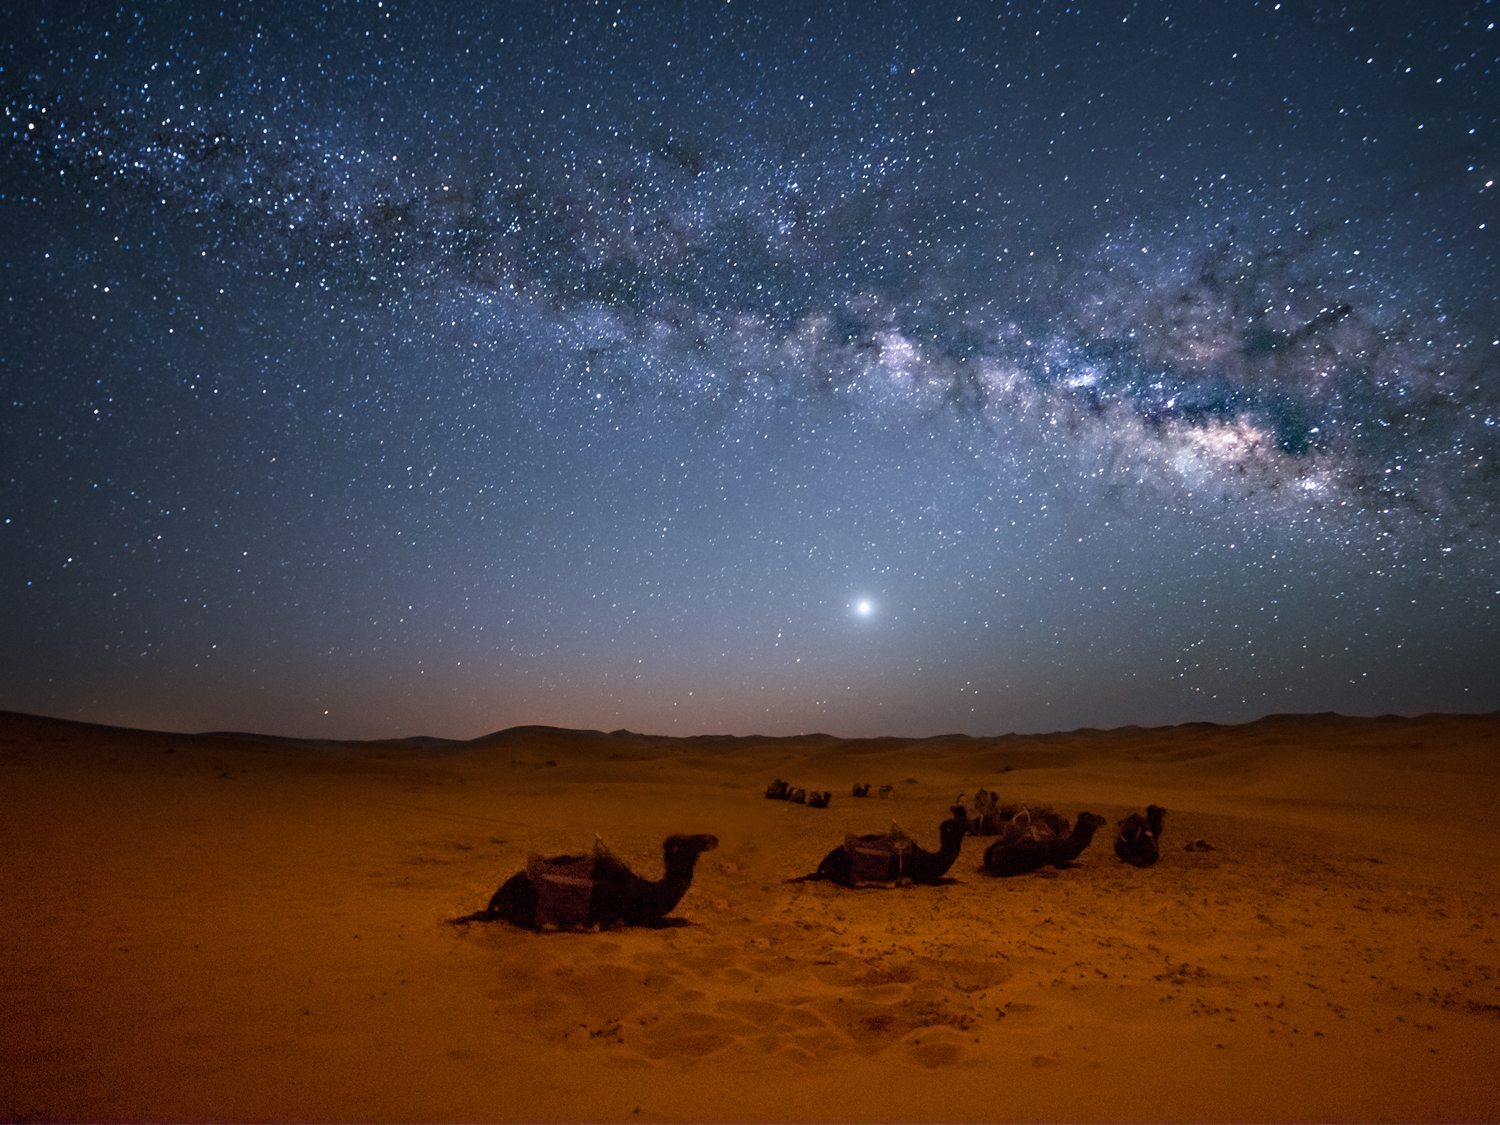 The Sahara Desert at night with a camel resting and the stars overhead